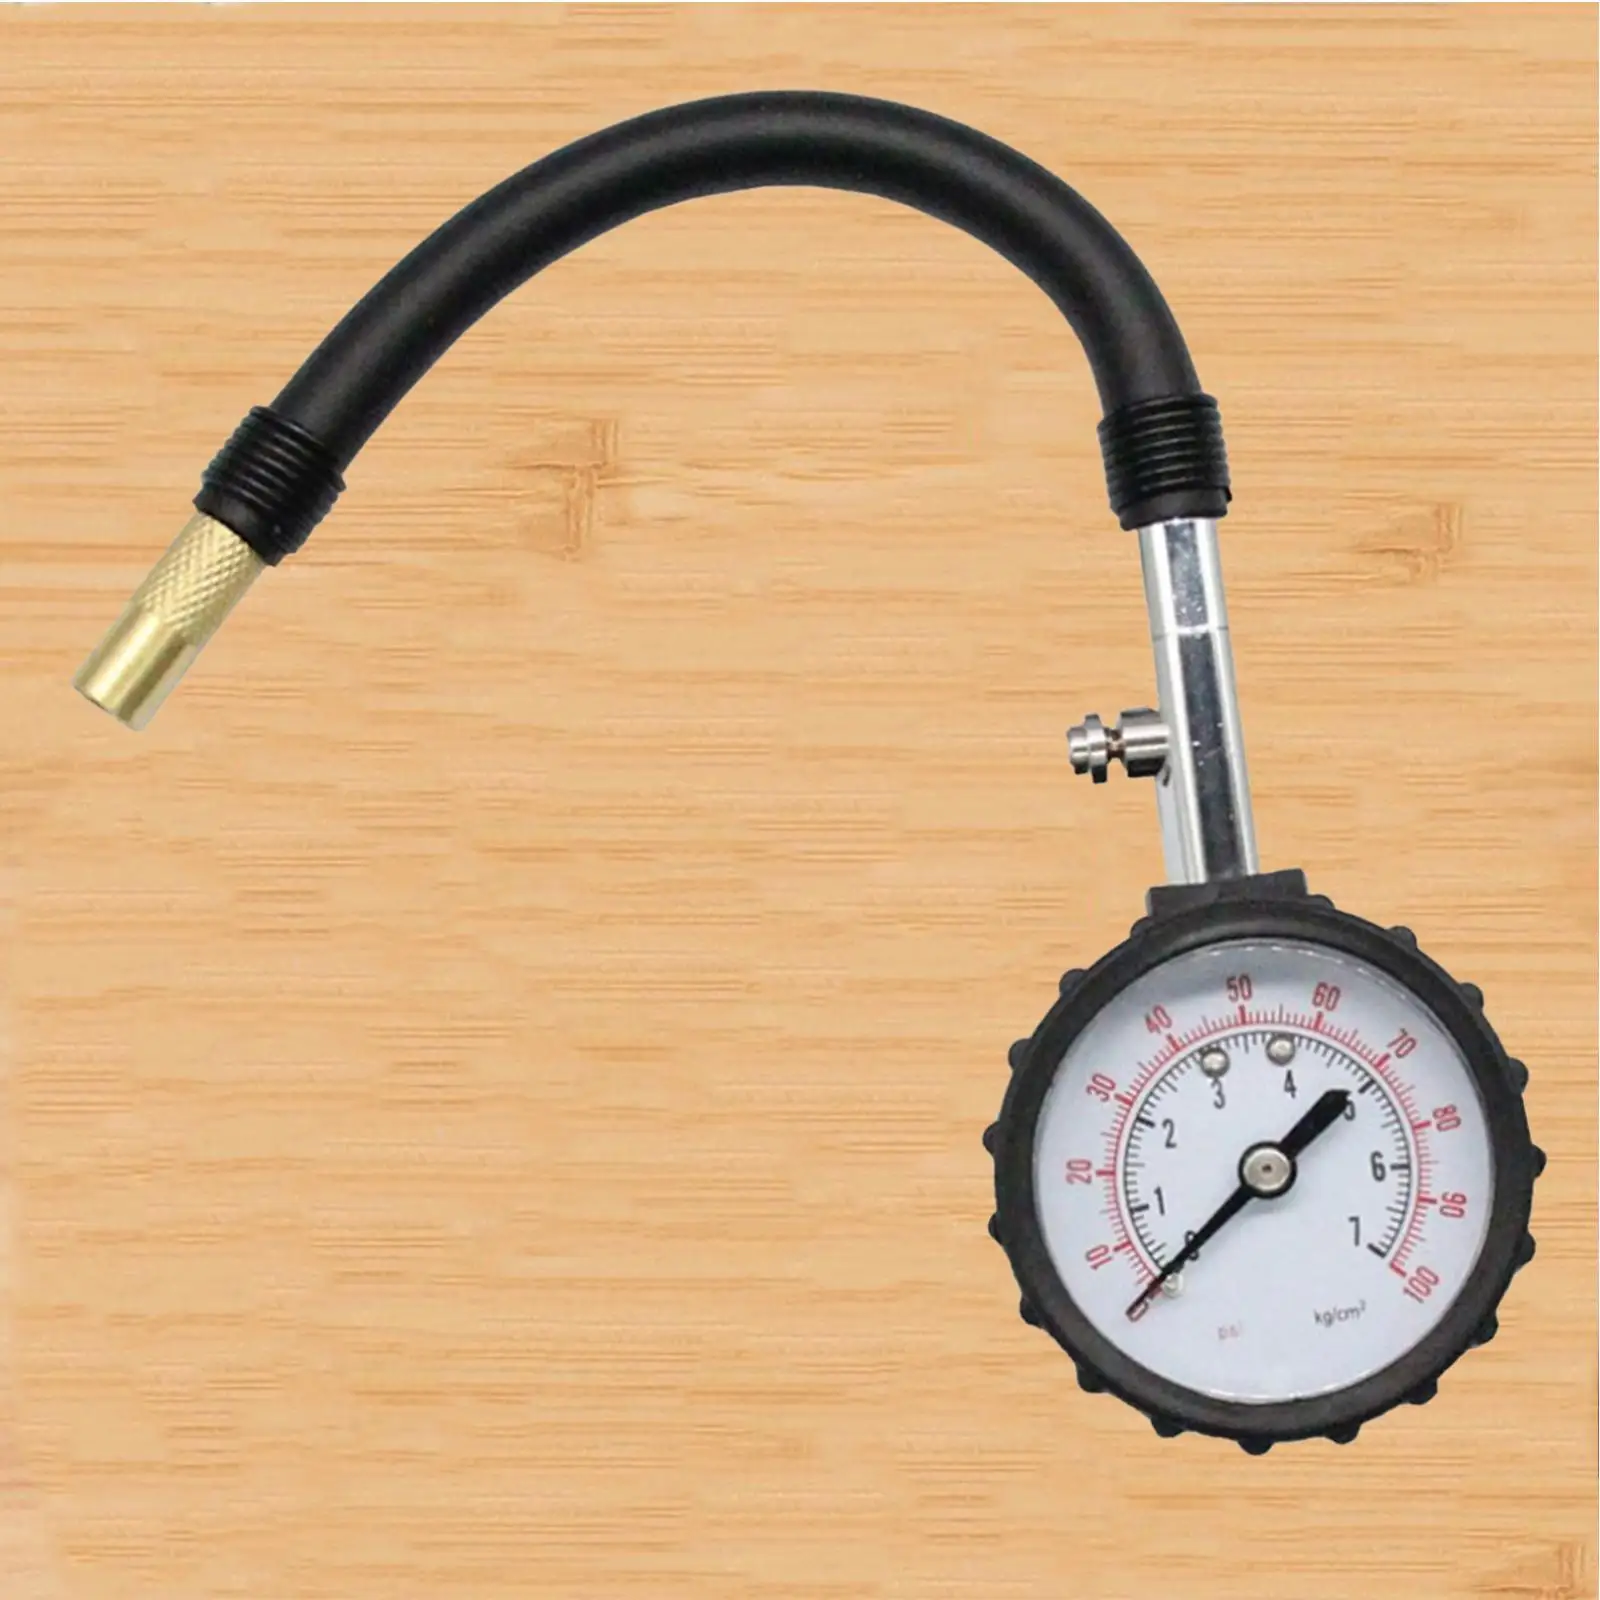 0-100 PSI Tire Pressure Gauge for Trucks, Cars, Motorcycles, ATVs And SUVs with